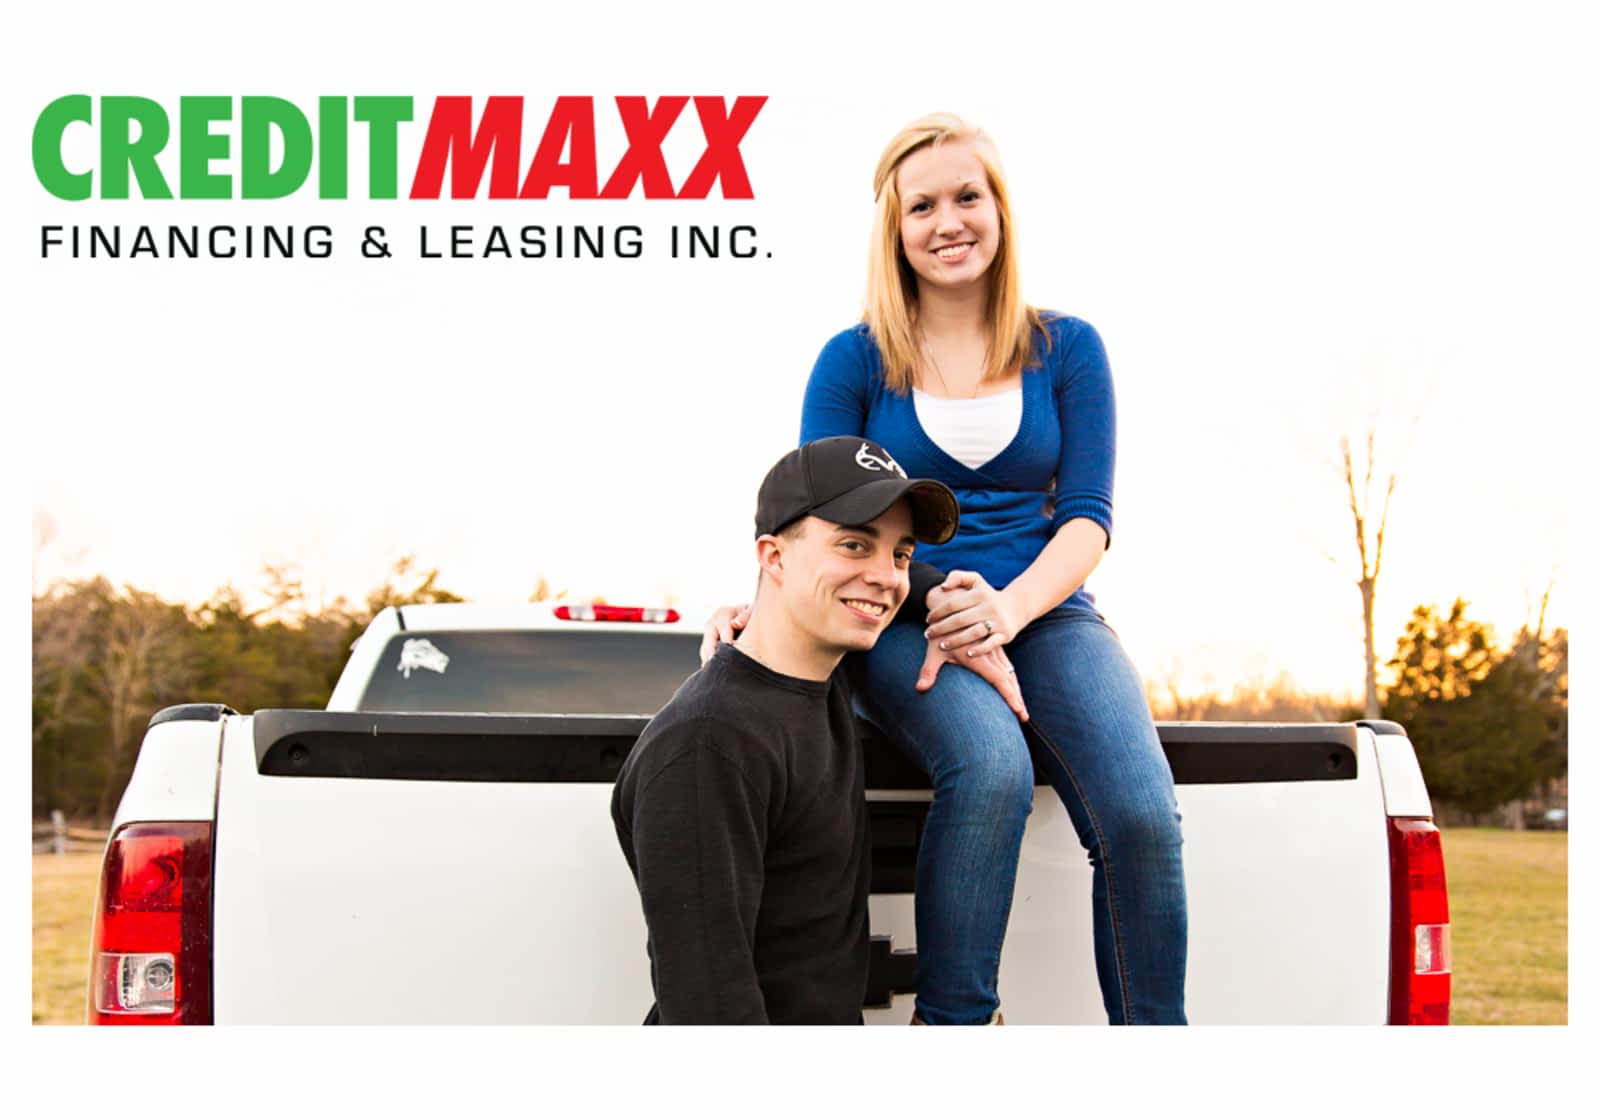 CreditMaxx Financing and Leasing